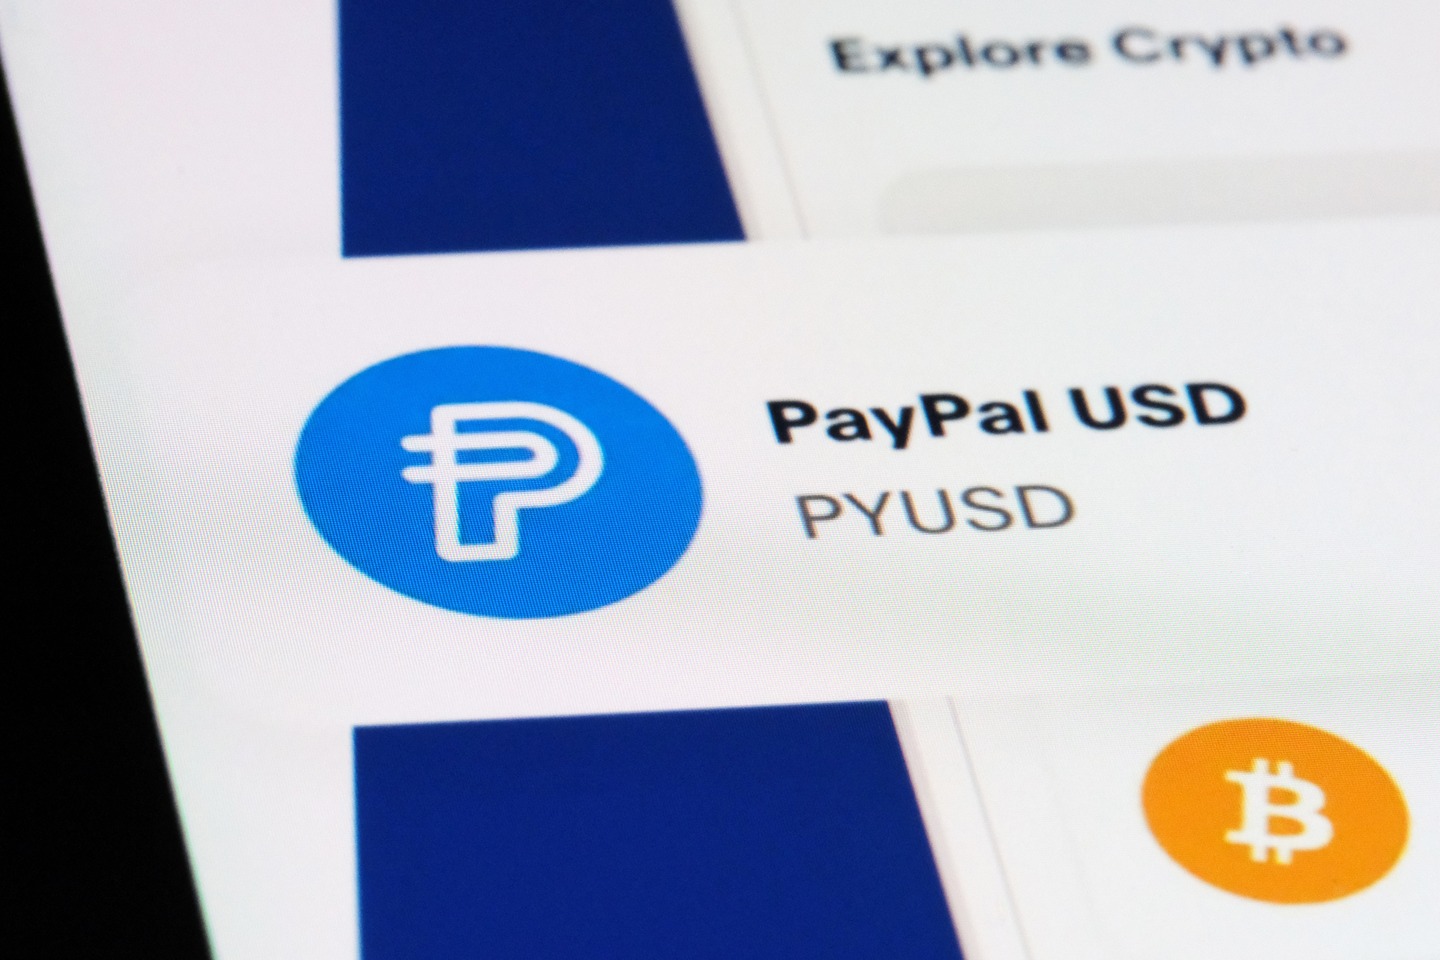 Paypal stablecoin - is everything OK?